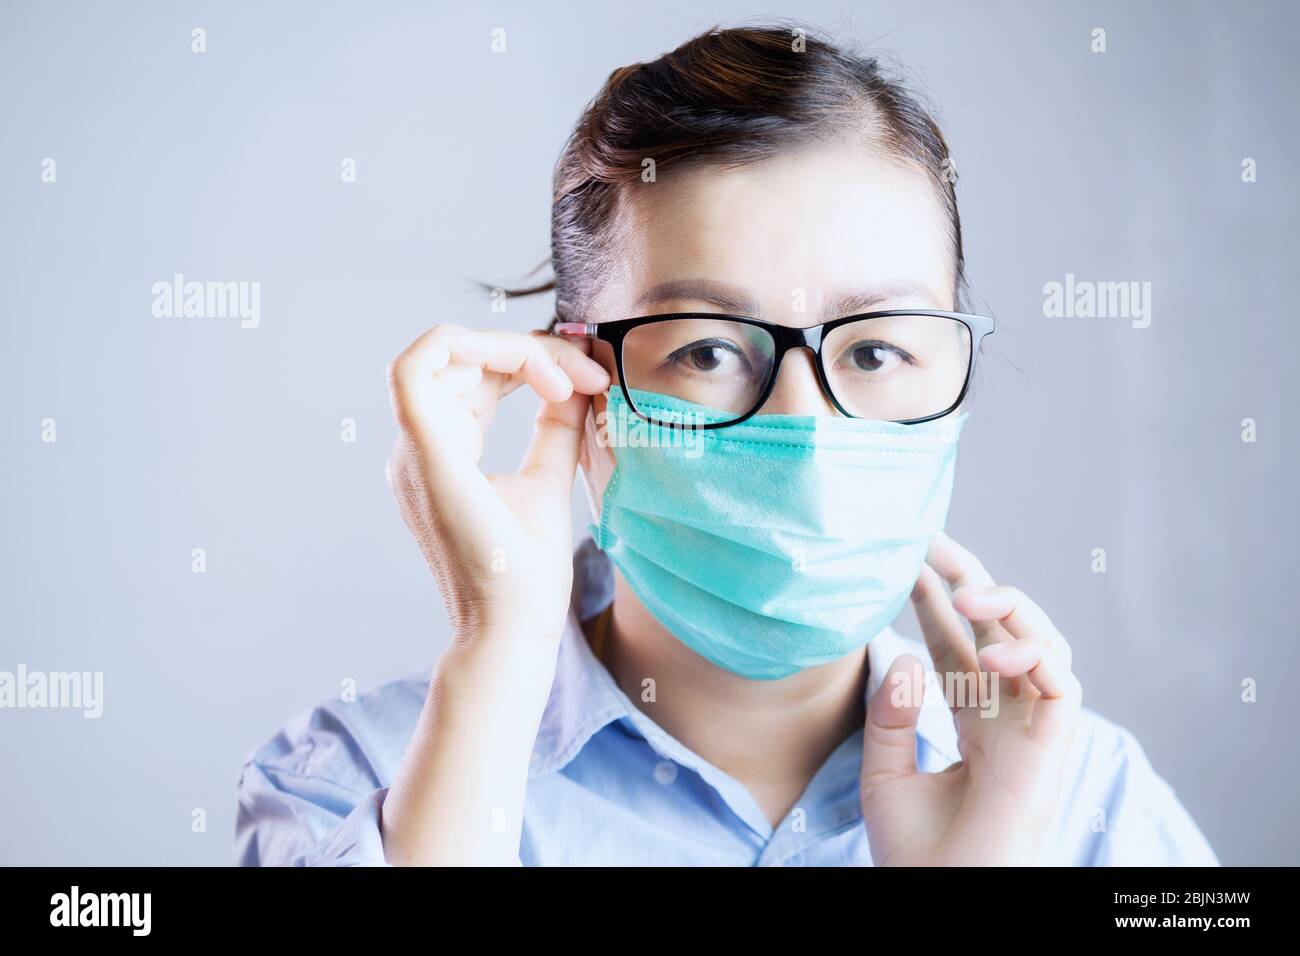 Portrait of a woman wearing a face mask Stock Photo